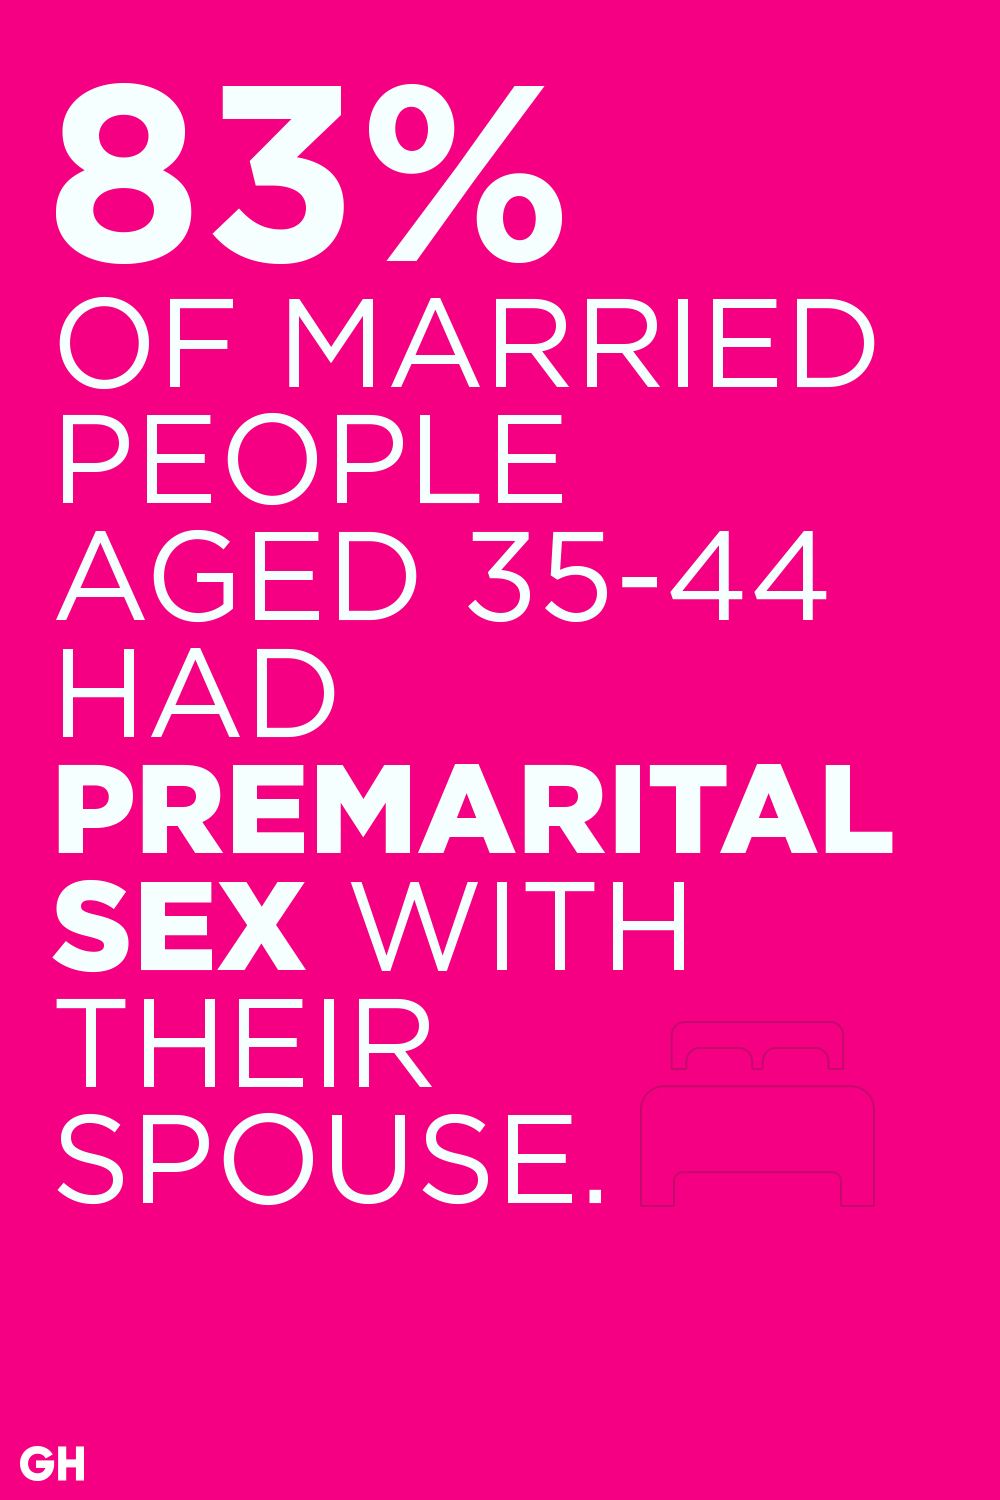 Statistics About Married Sex